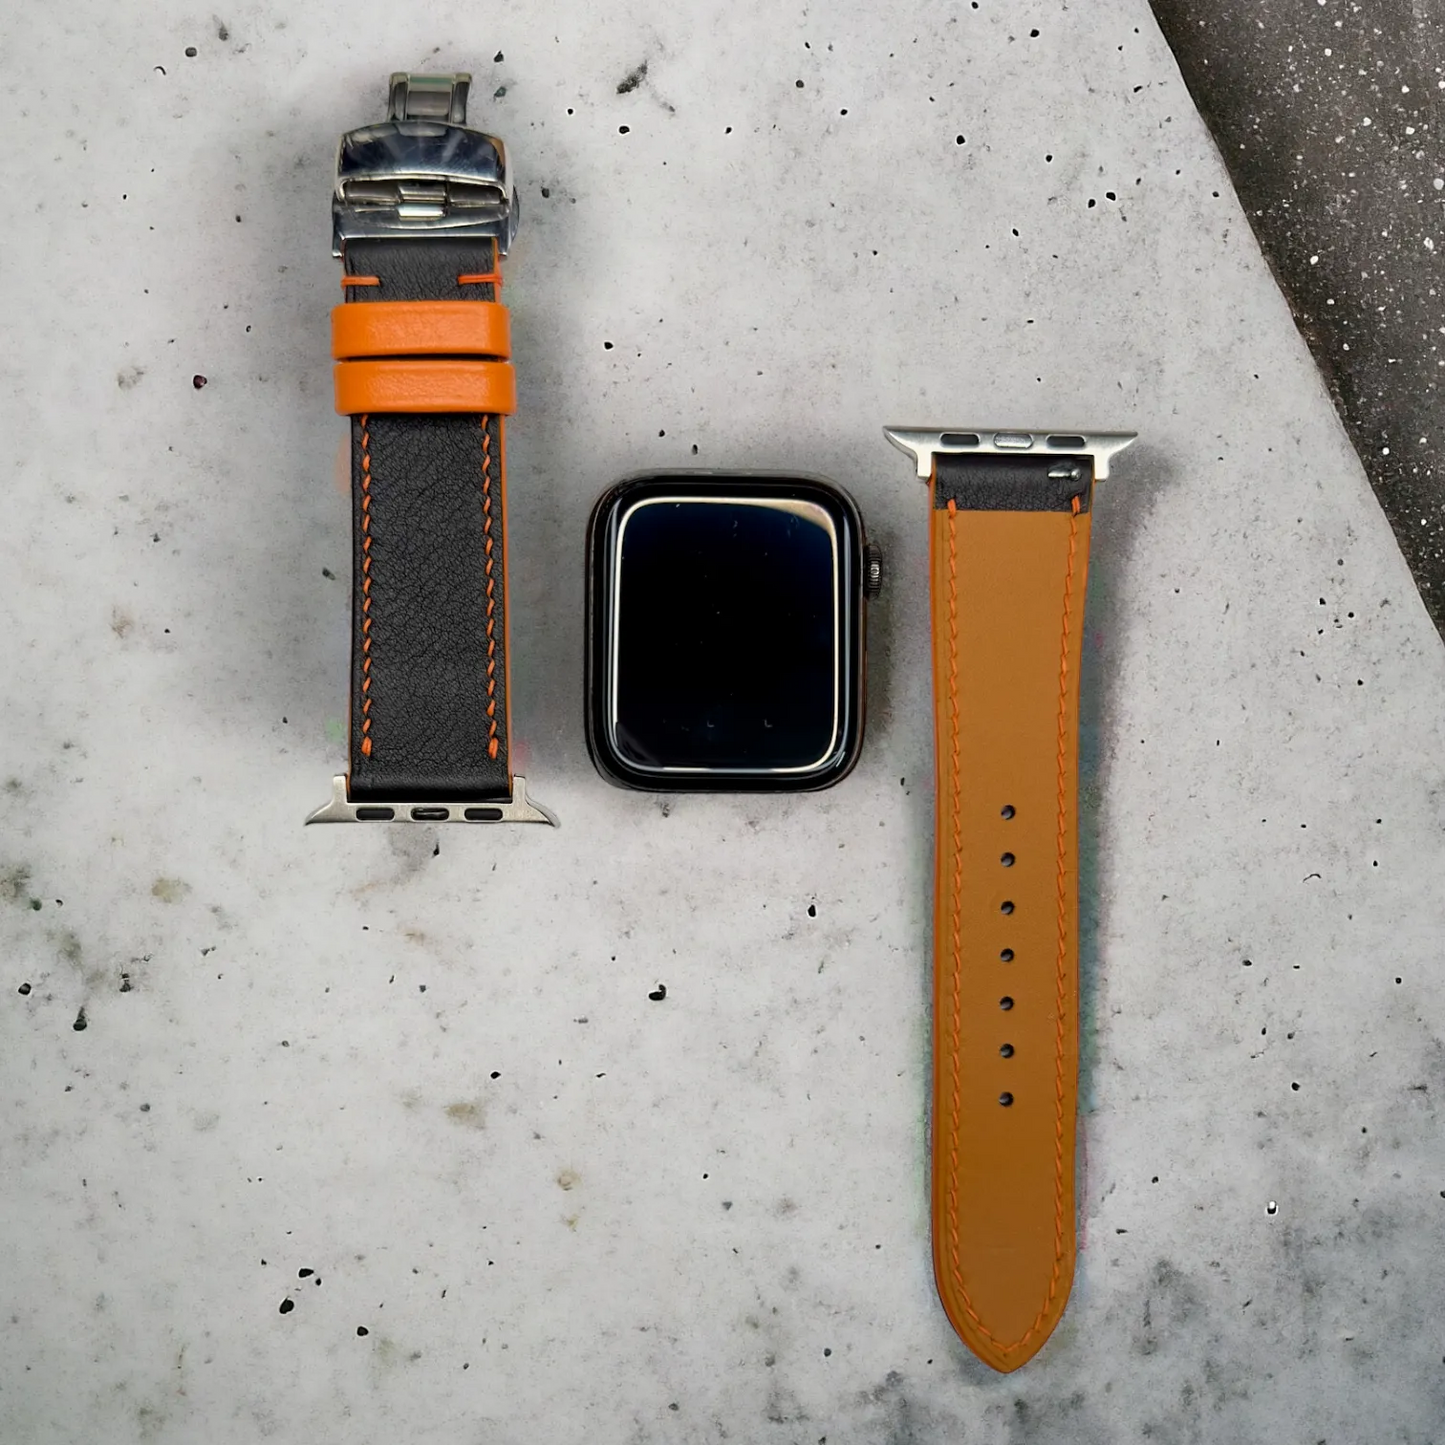 Trendy leather iwatch band in black Swift leather with orange detailing, stylishly designed for everyday wear.